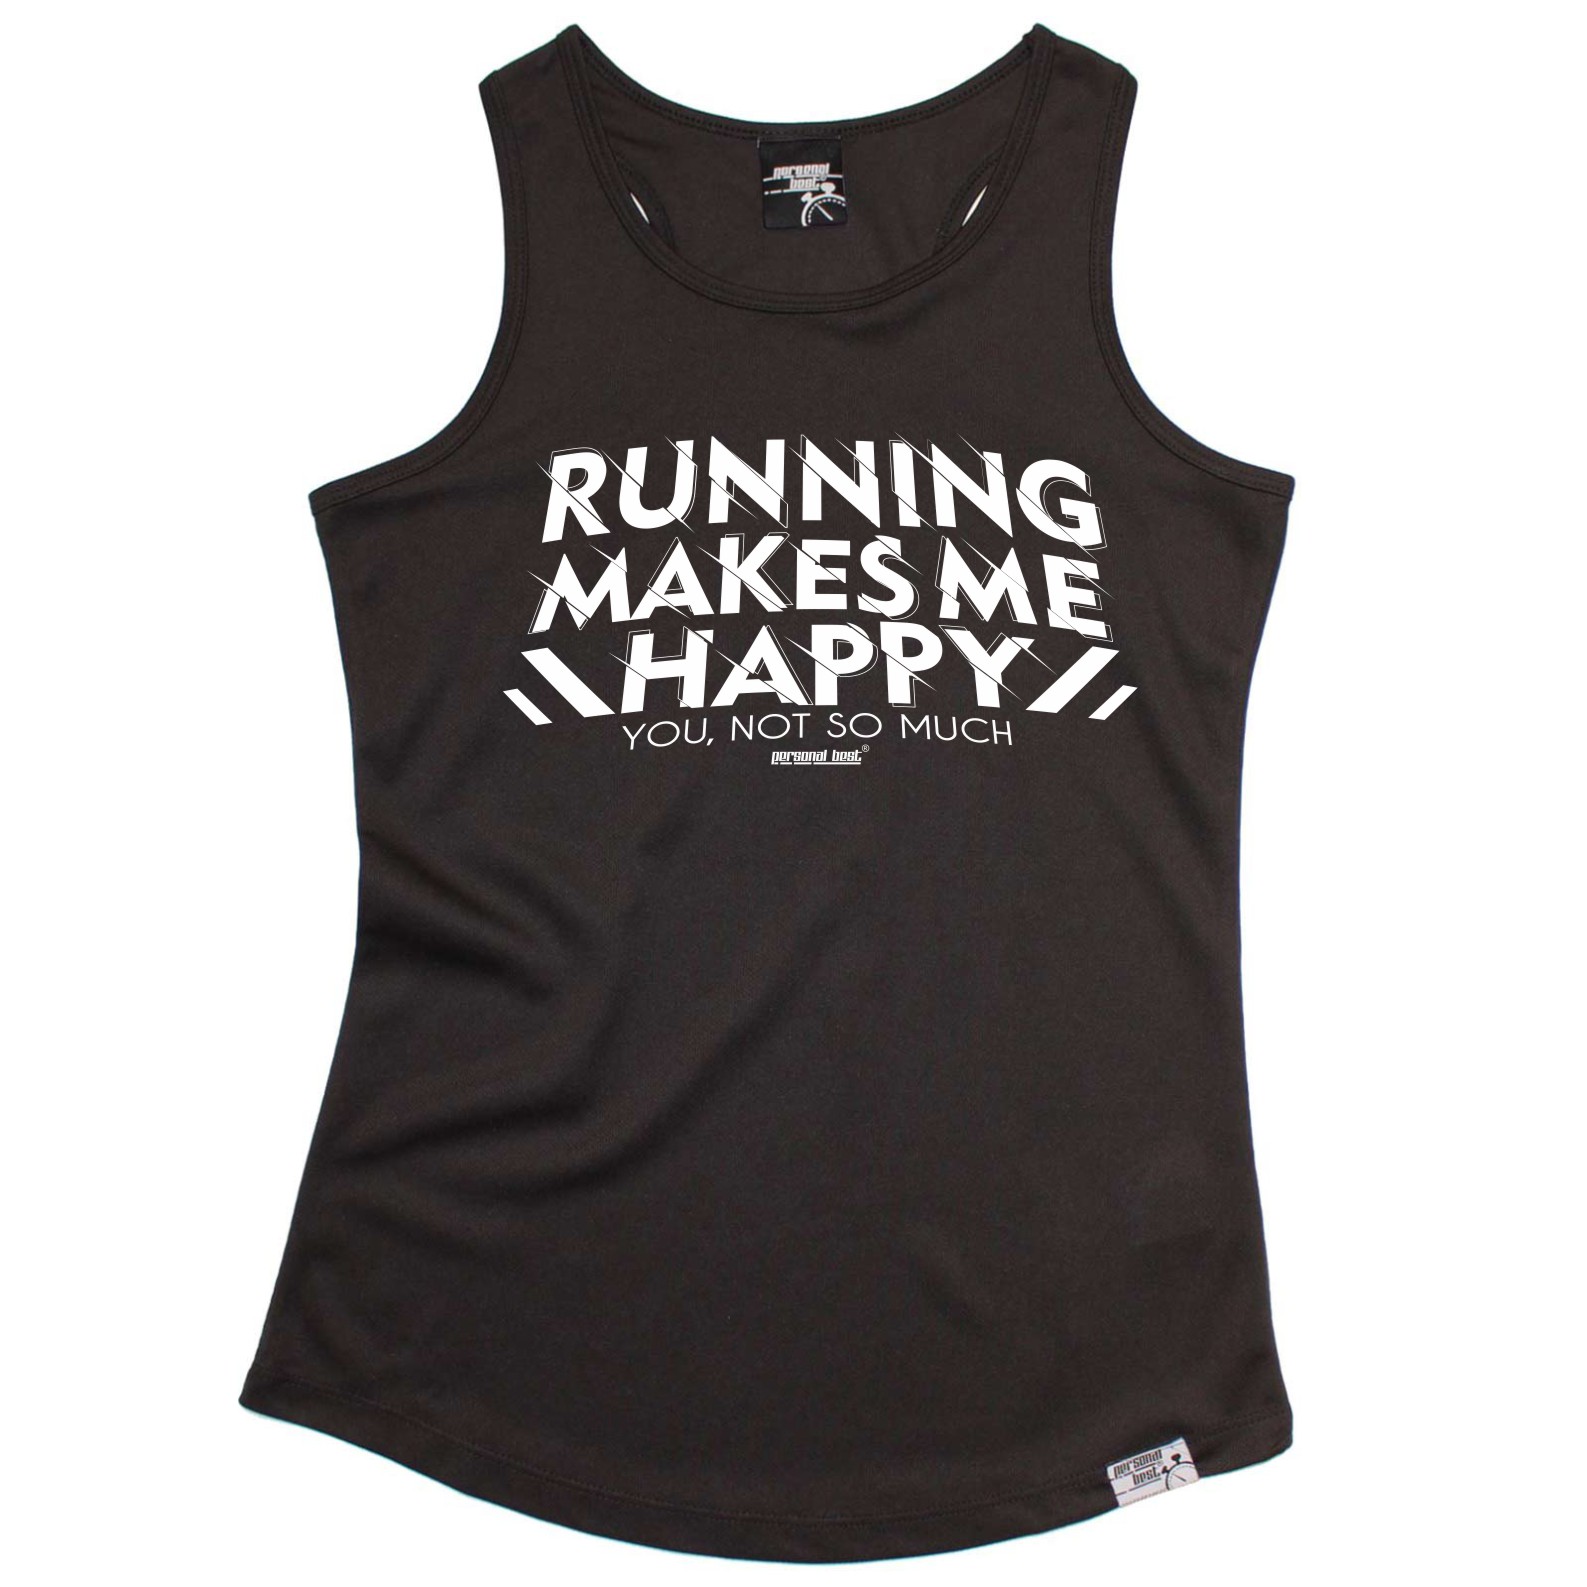 MENS Running Makes Me Happy Breathable fitness sports T SHIRT TRAINING VEST